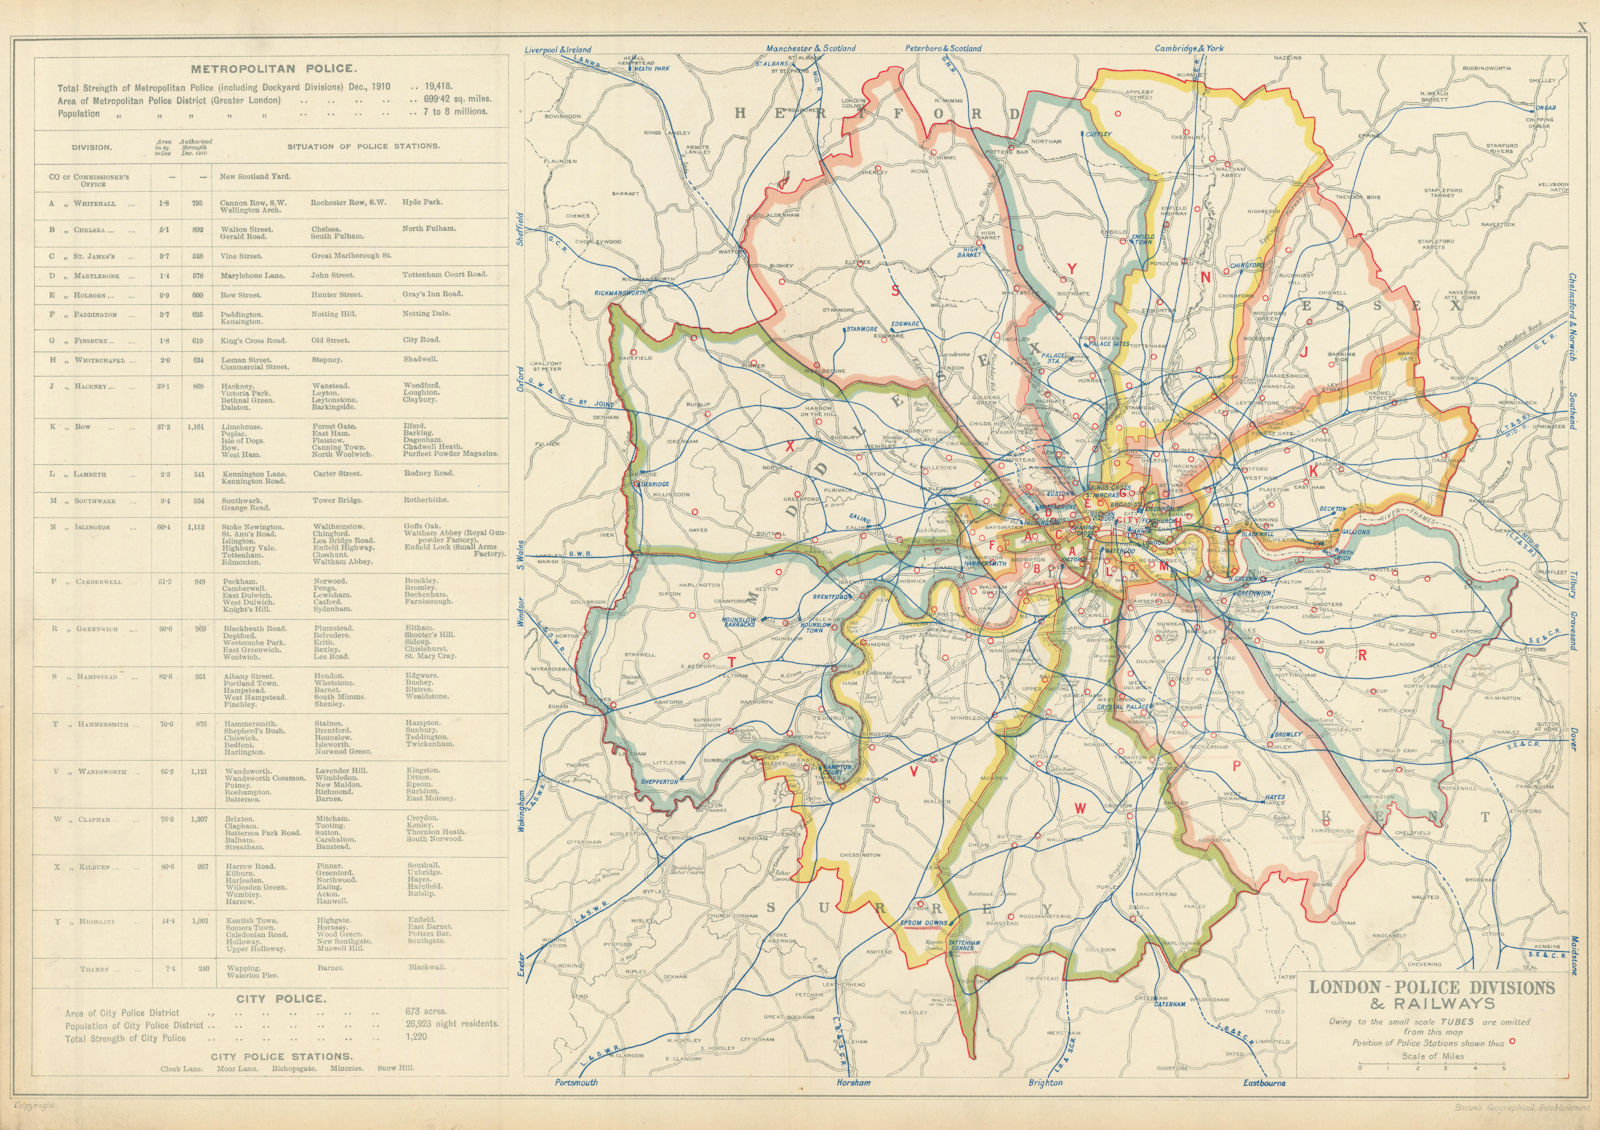 LONDON POLICE DIVISIONS & RAILWAYS showing Police stations. BACON 1913 old map